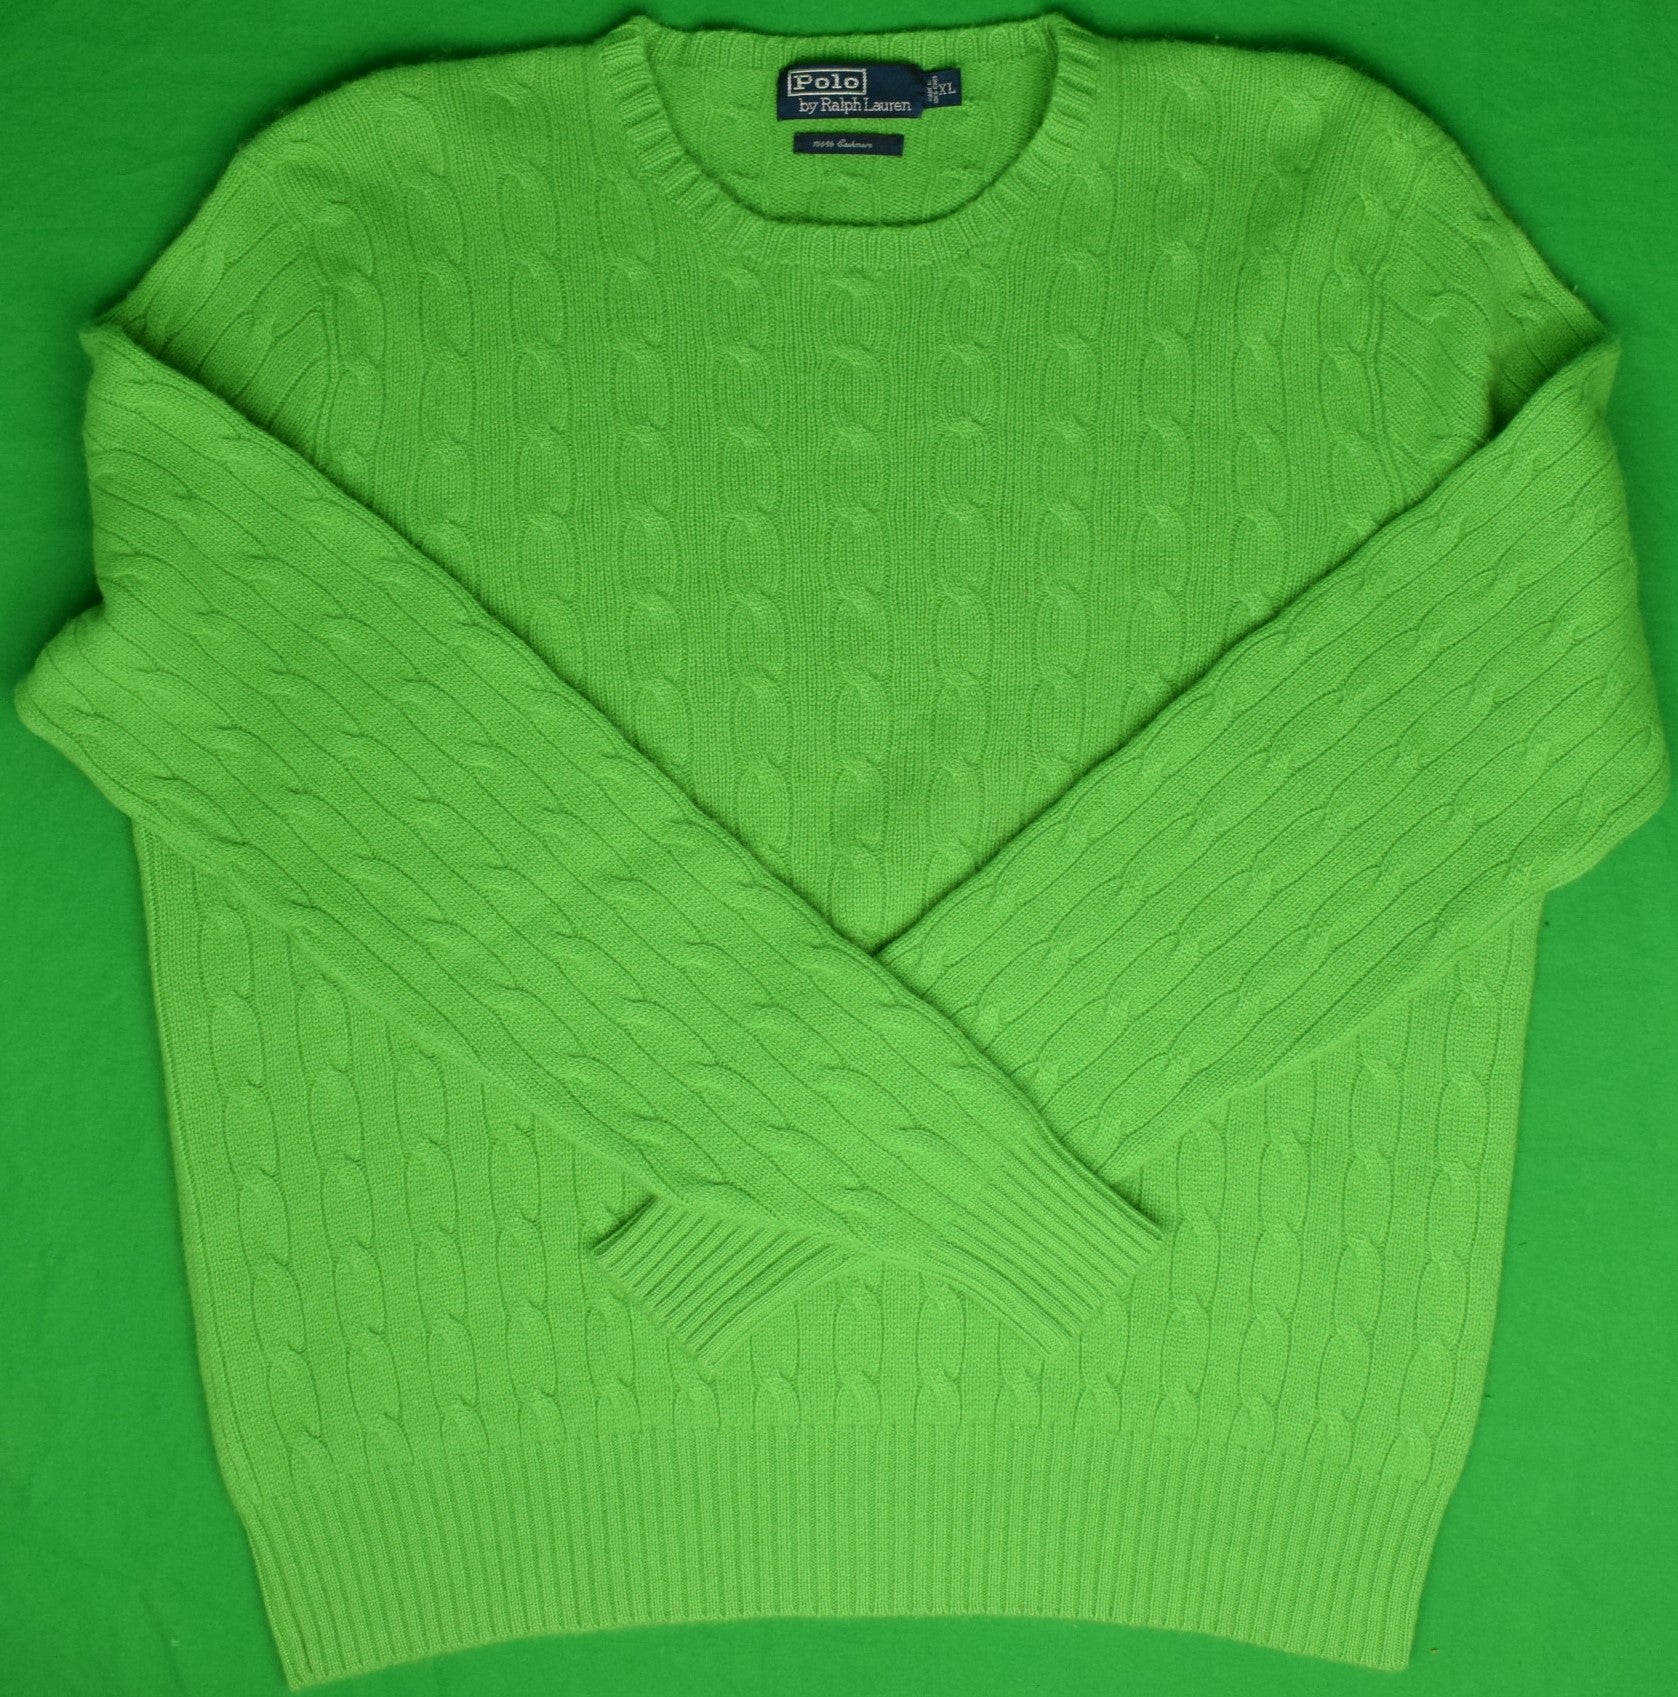 Polo by Ralph Lauren Apple Green 100% Cashmere Cable Crew Neck Sweater